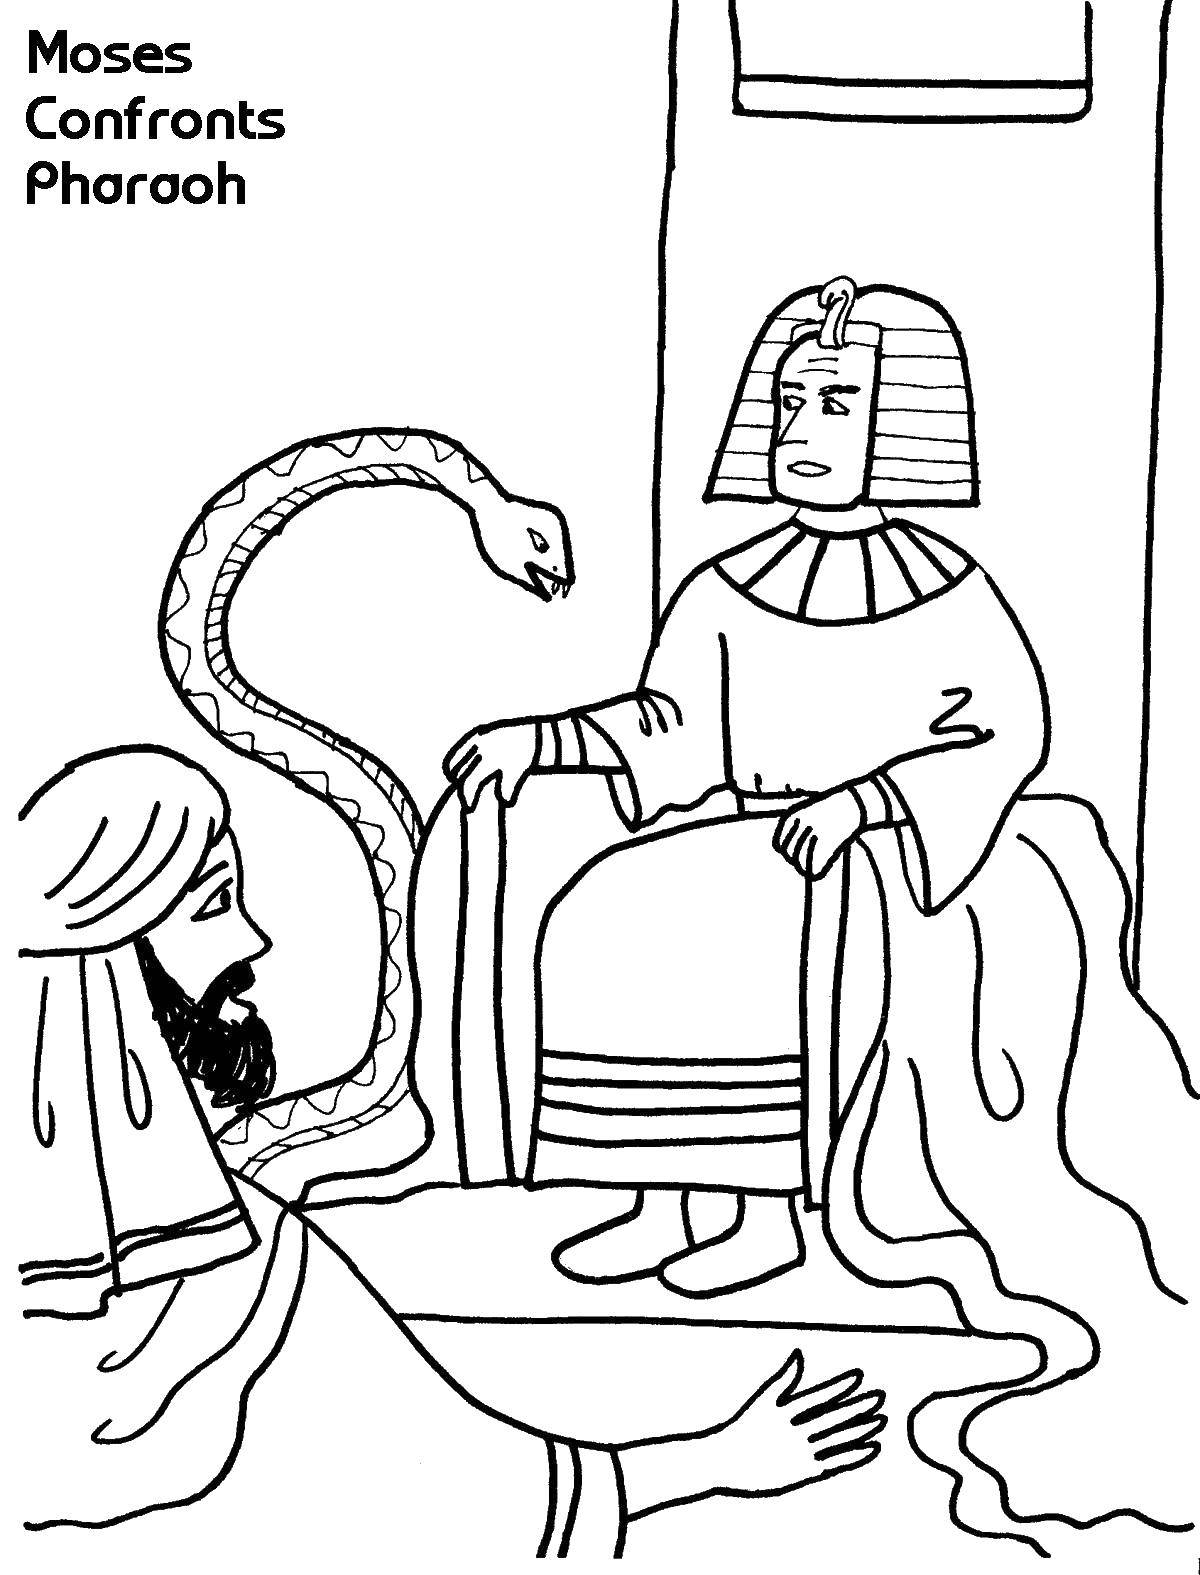 Coloring Pharaoh and the snake. Category coloring. Tags:  the pharaohs, snakes.